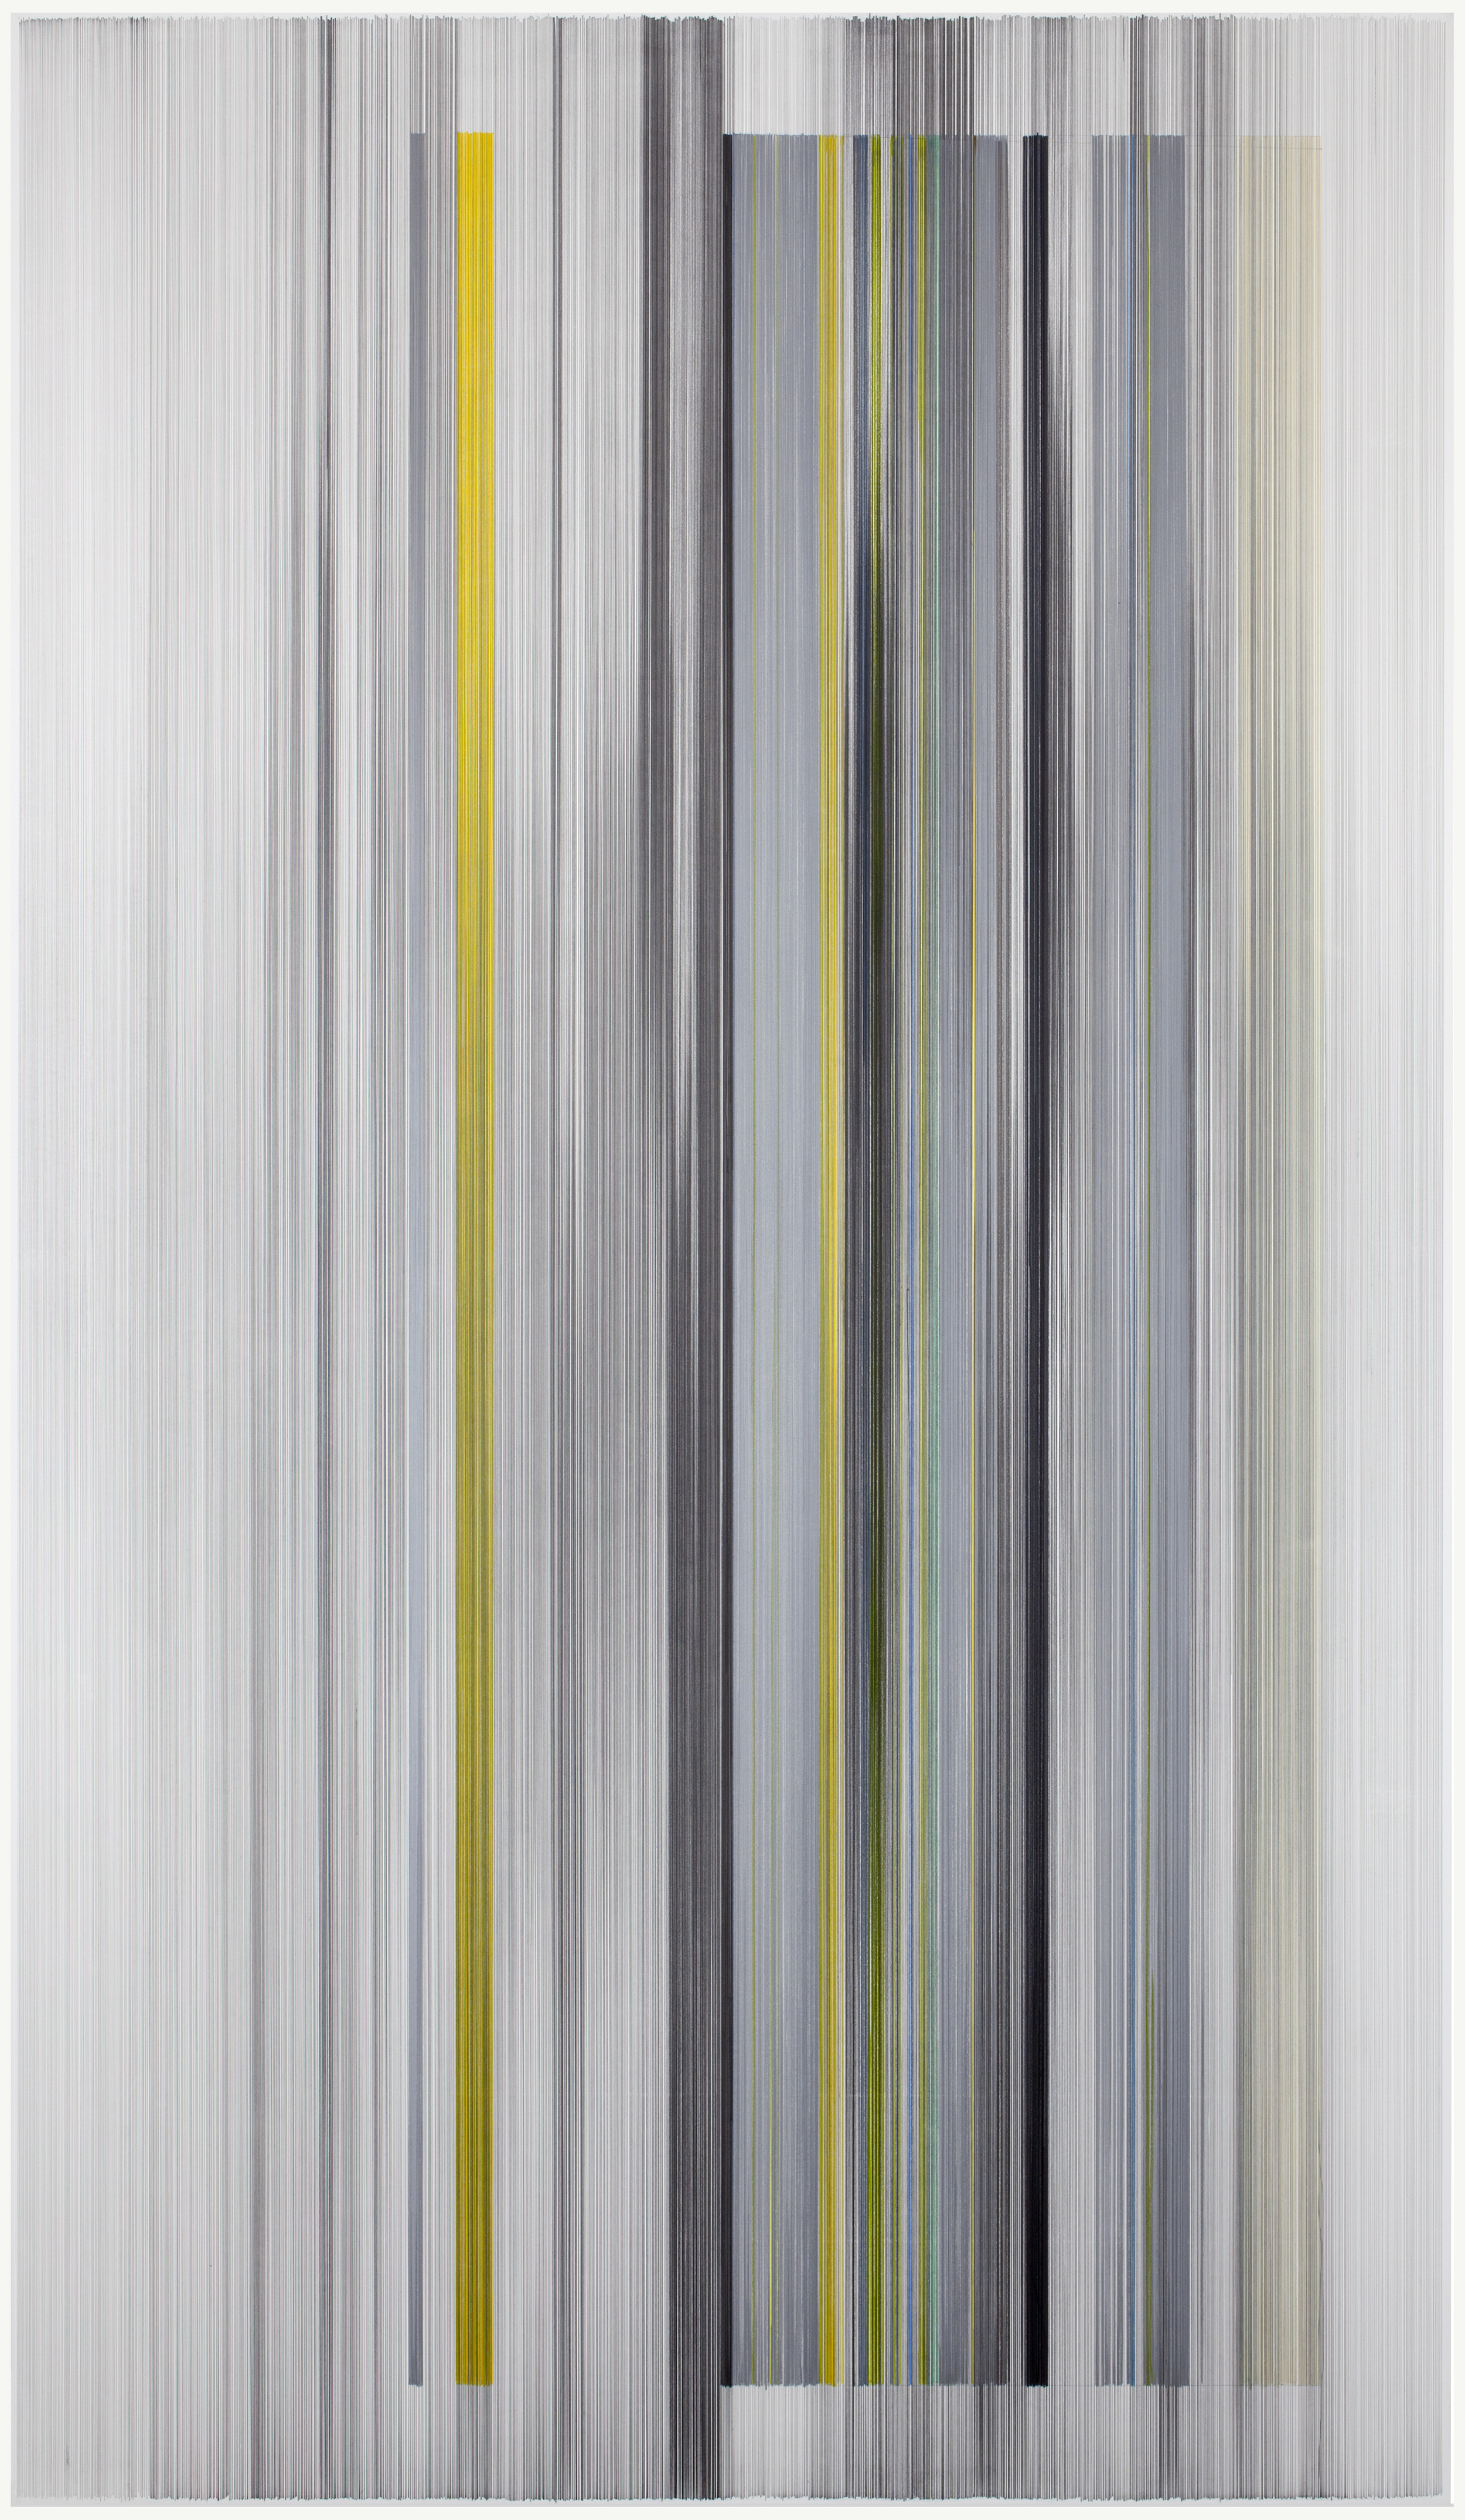    unfold 22   2016 graphite and colored pencil on mat board 102 x 59 inches 